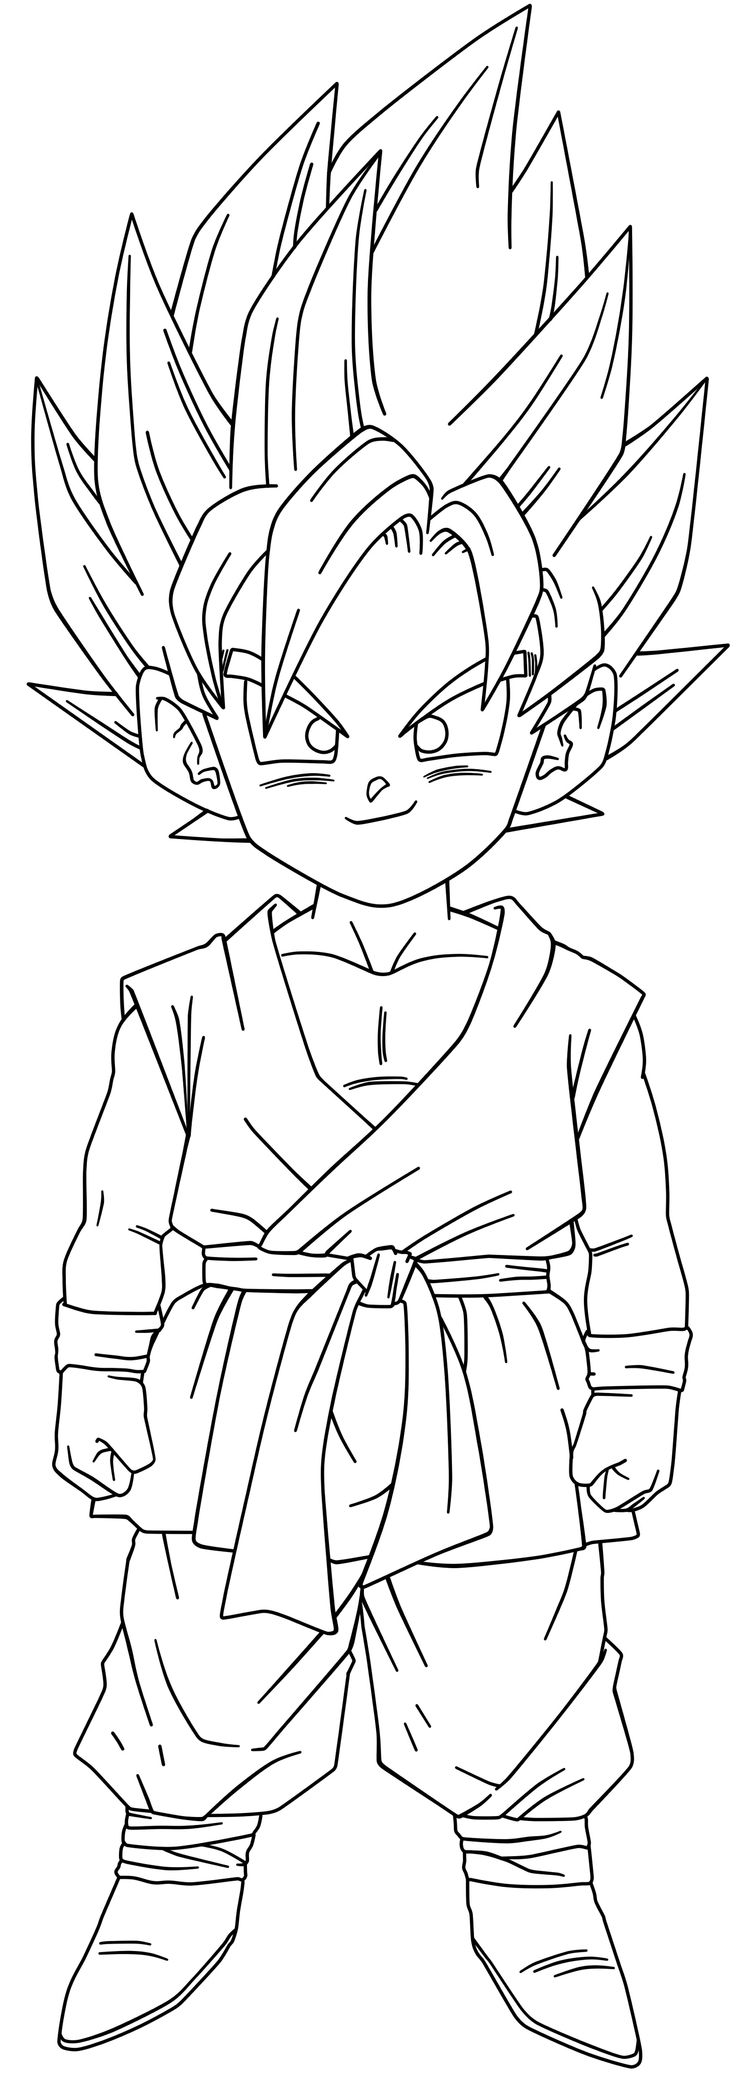 goku coloring pages goku ssj2 coloring pages coloring pages goku coloring pages 